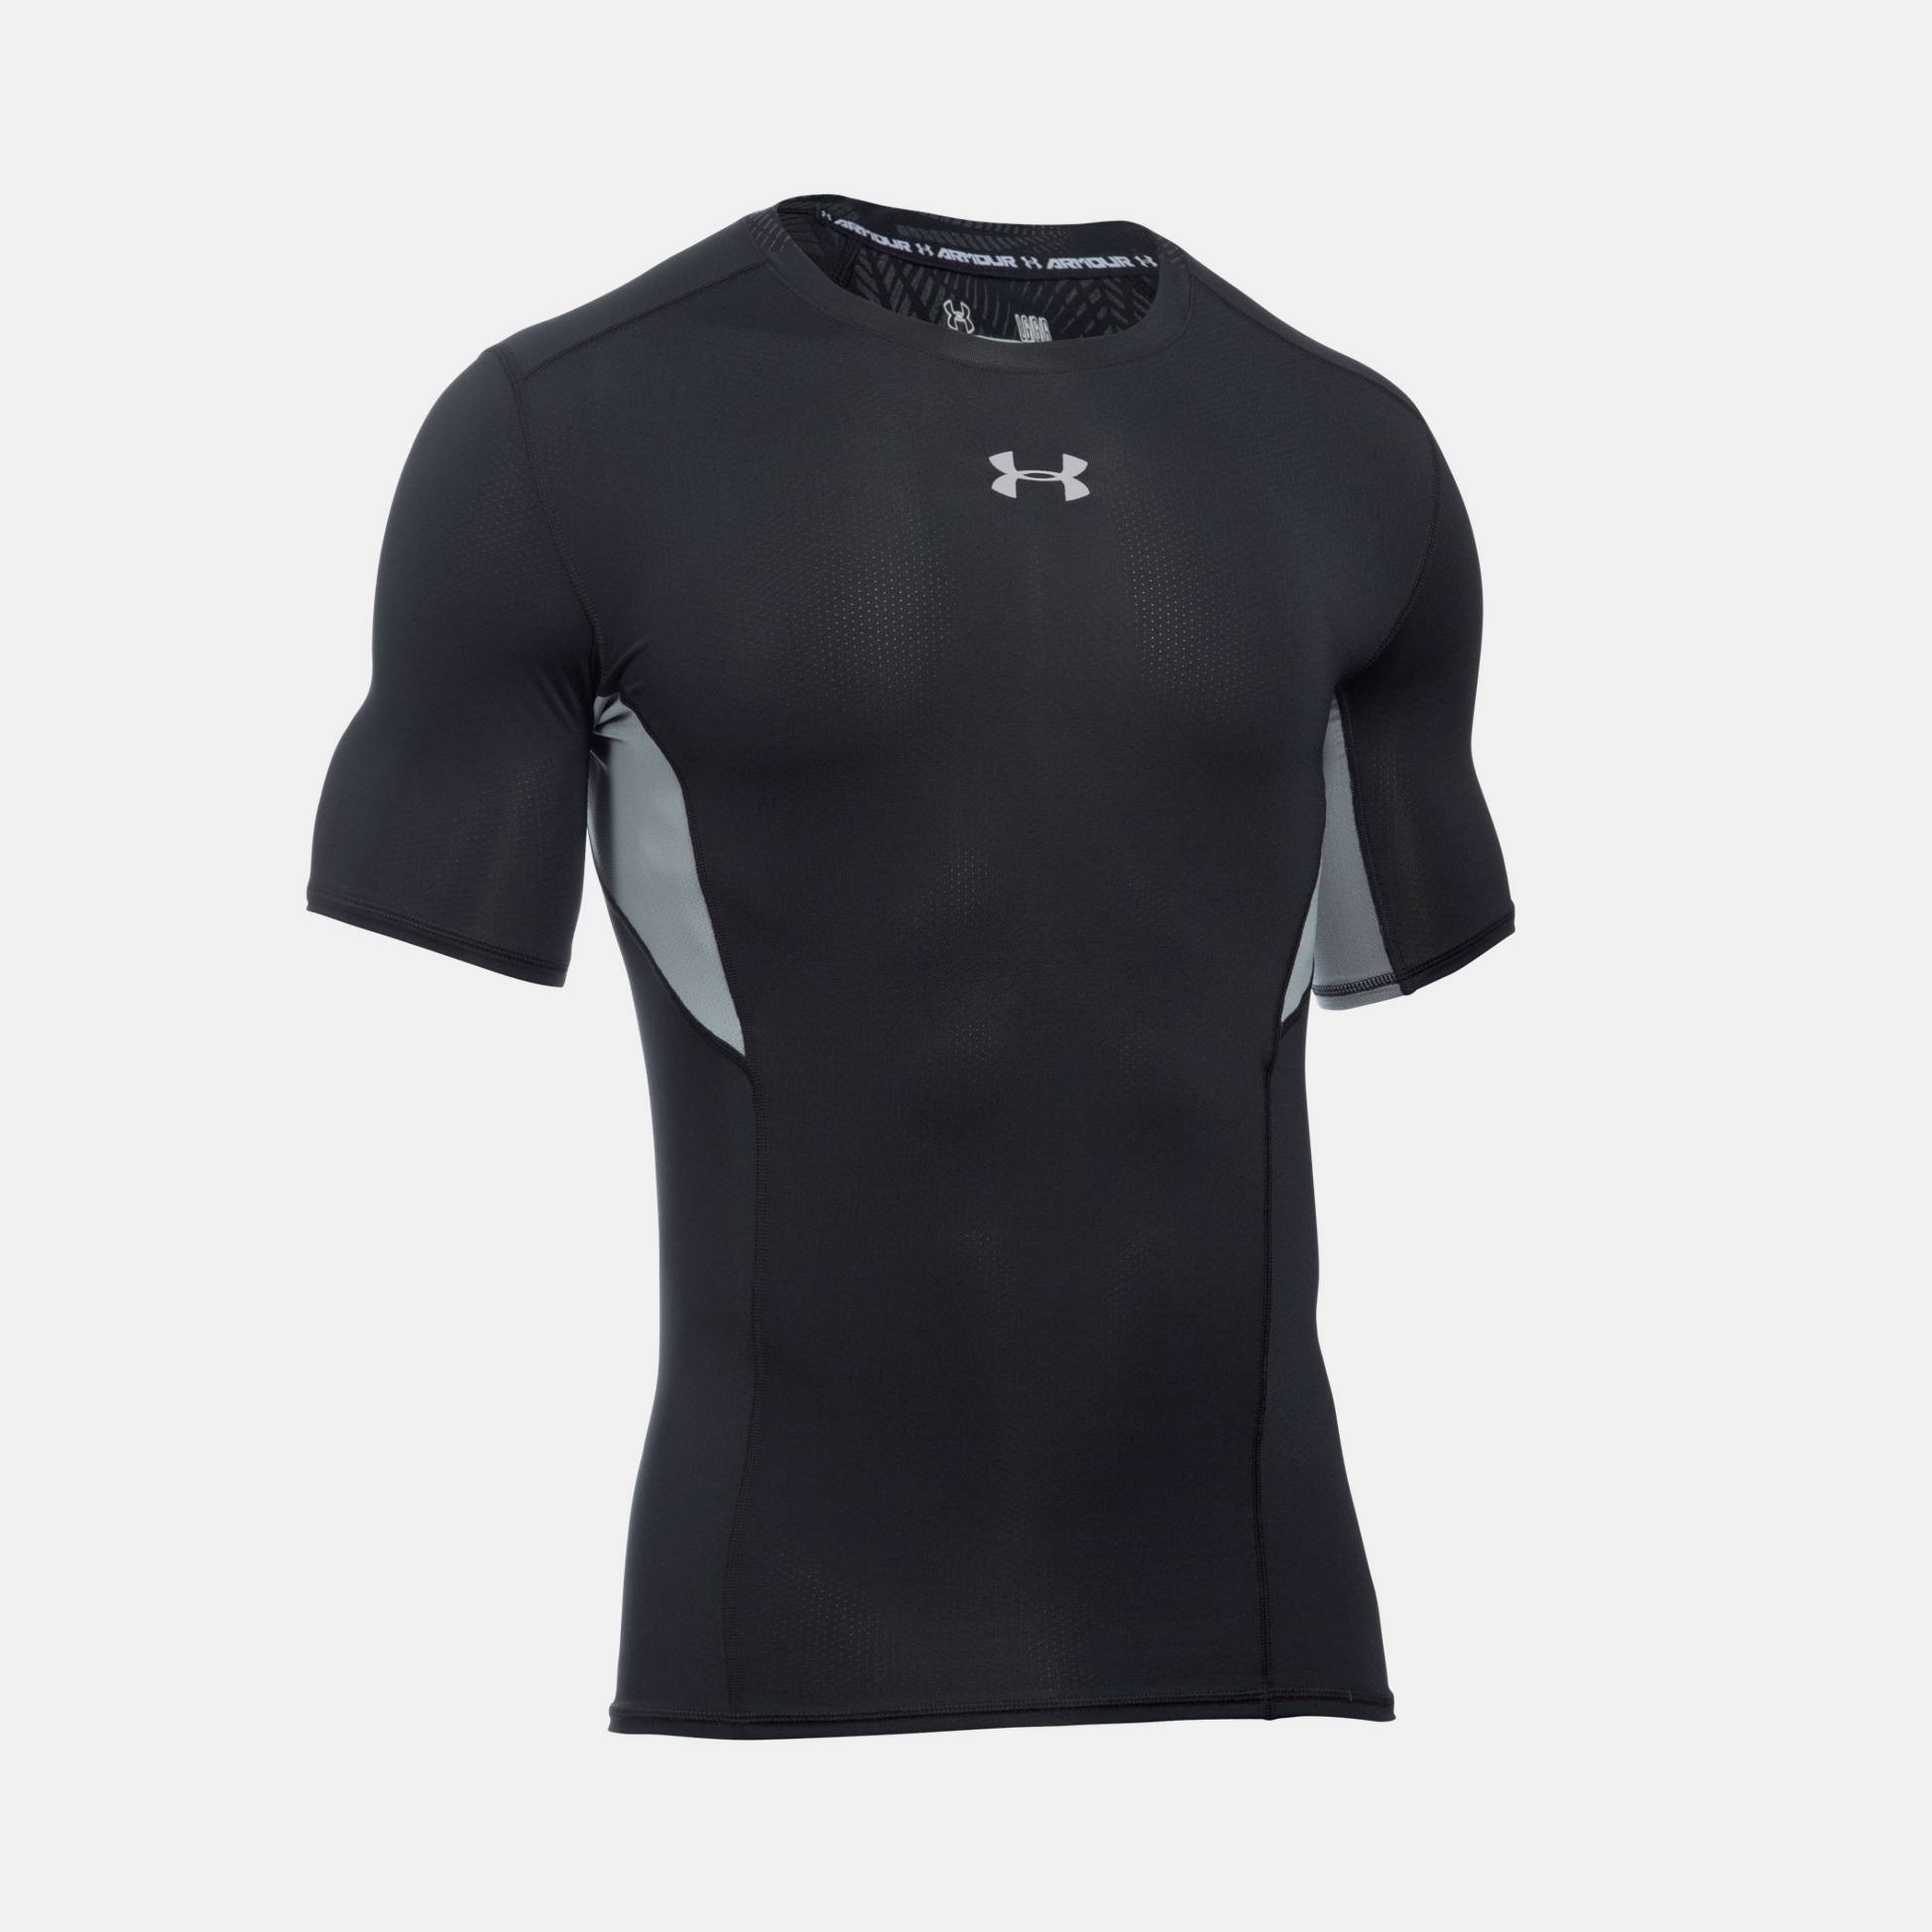  -  under armour CoolSwitch Compression Shirt